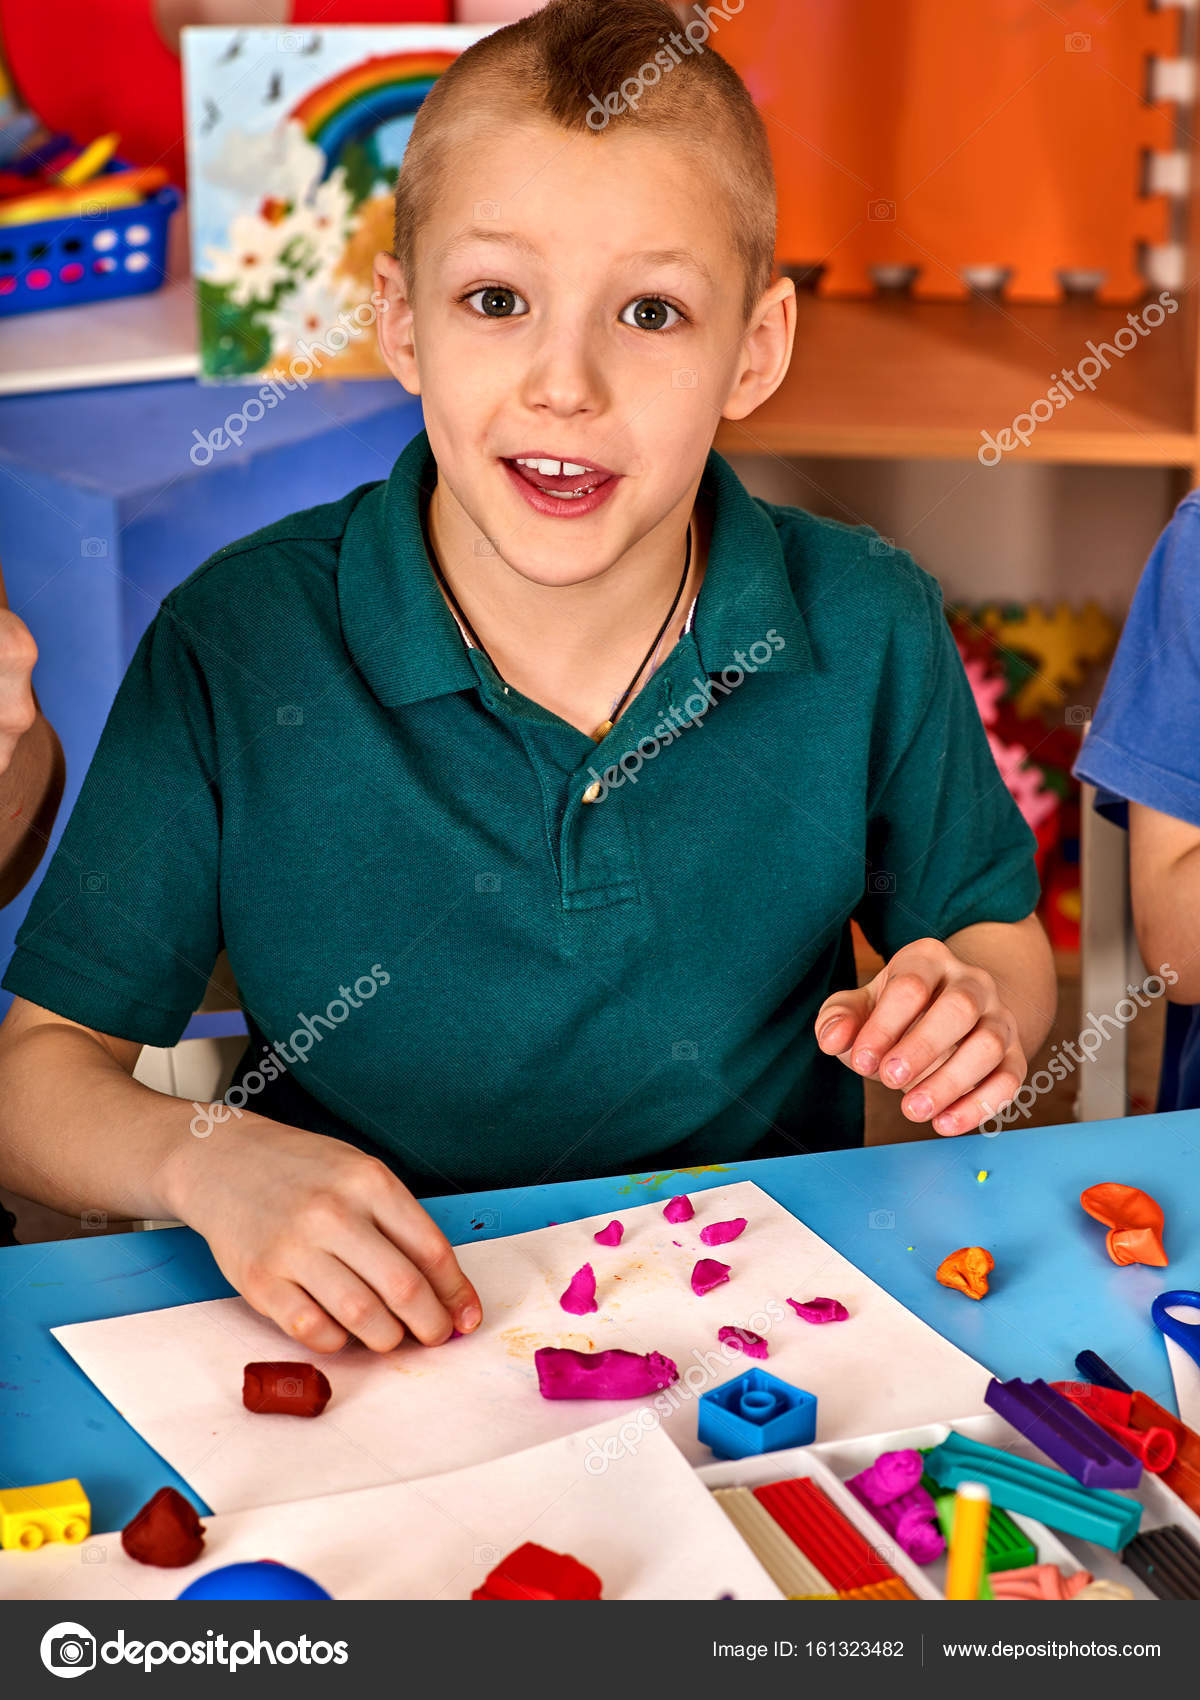 Plasticine modeling clay in children class. kids together play dough and  mold from plasticine in kindergarten or preschool. Group of four people.  Teaching modeling. Stock Photo